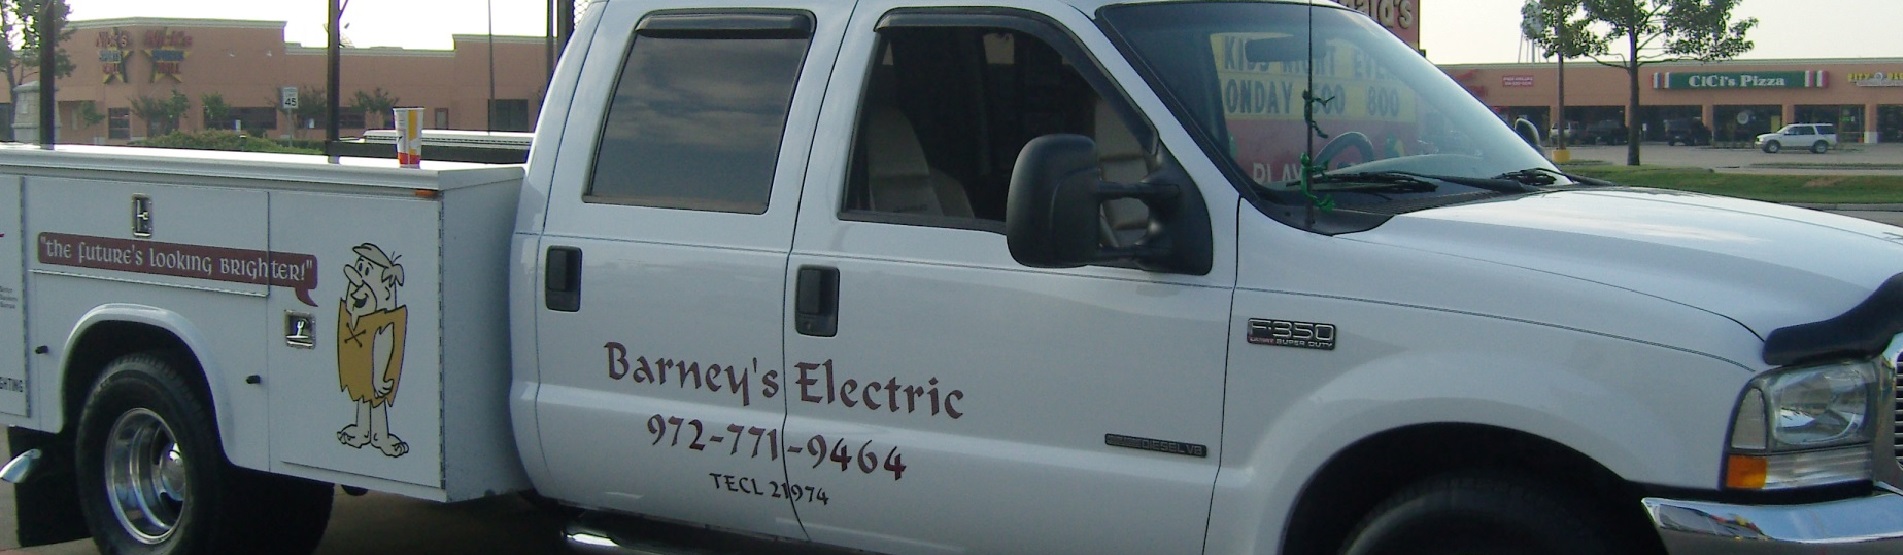 electrical contractor fate texas Electrician Fate TX Barney's Electric Full Service Electrician Residential Commercial Retail and New Construction Wiring Repair Installation Service 24 Hour Emergency Services Master Electrician Rockwall Texas